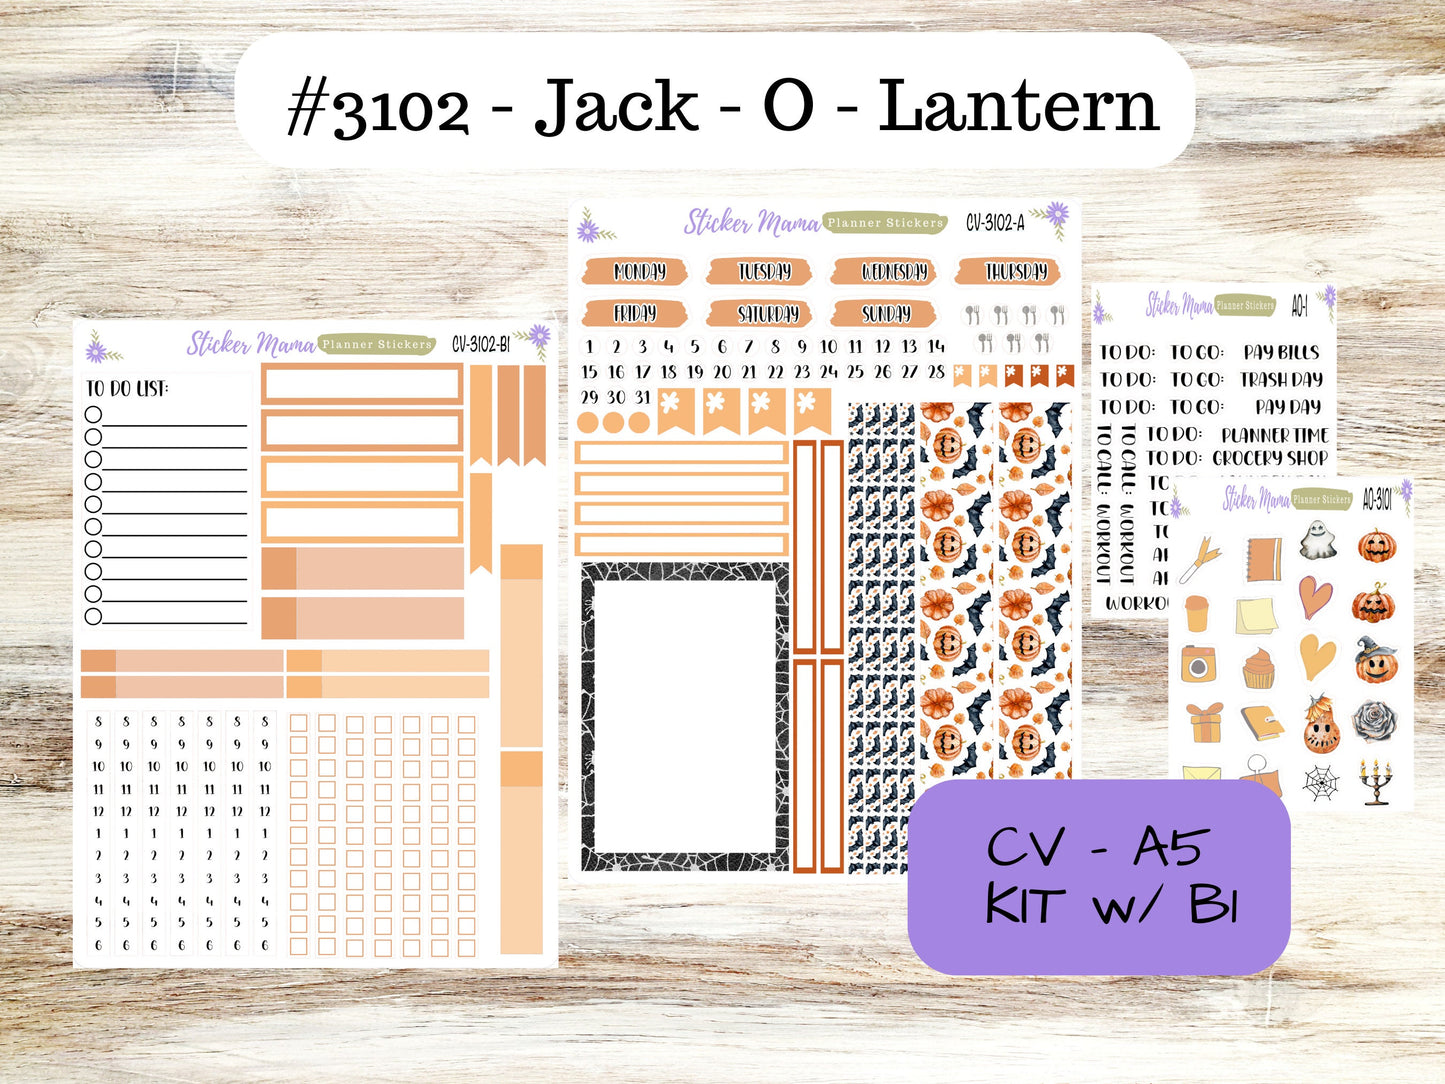 A5 COMPACT VERTICAL-Kit #3102 || Jack - O - Lantern  - Compact Vertical - Planner Stickers - Erin Condren Compact Vertical Weekly Kit